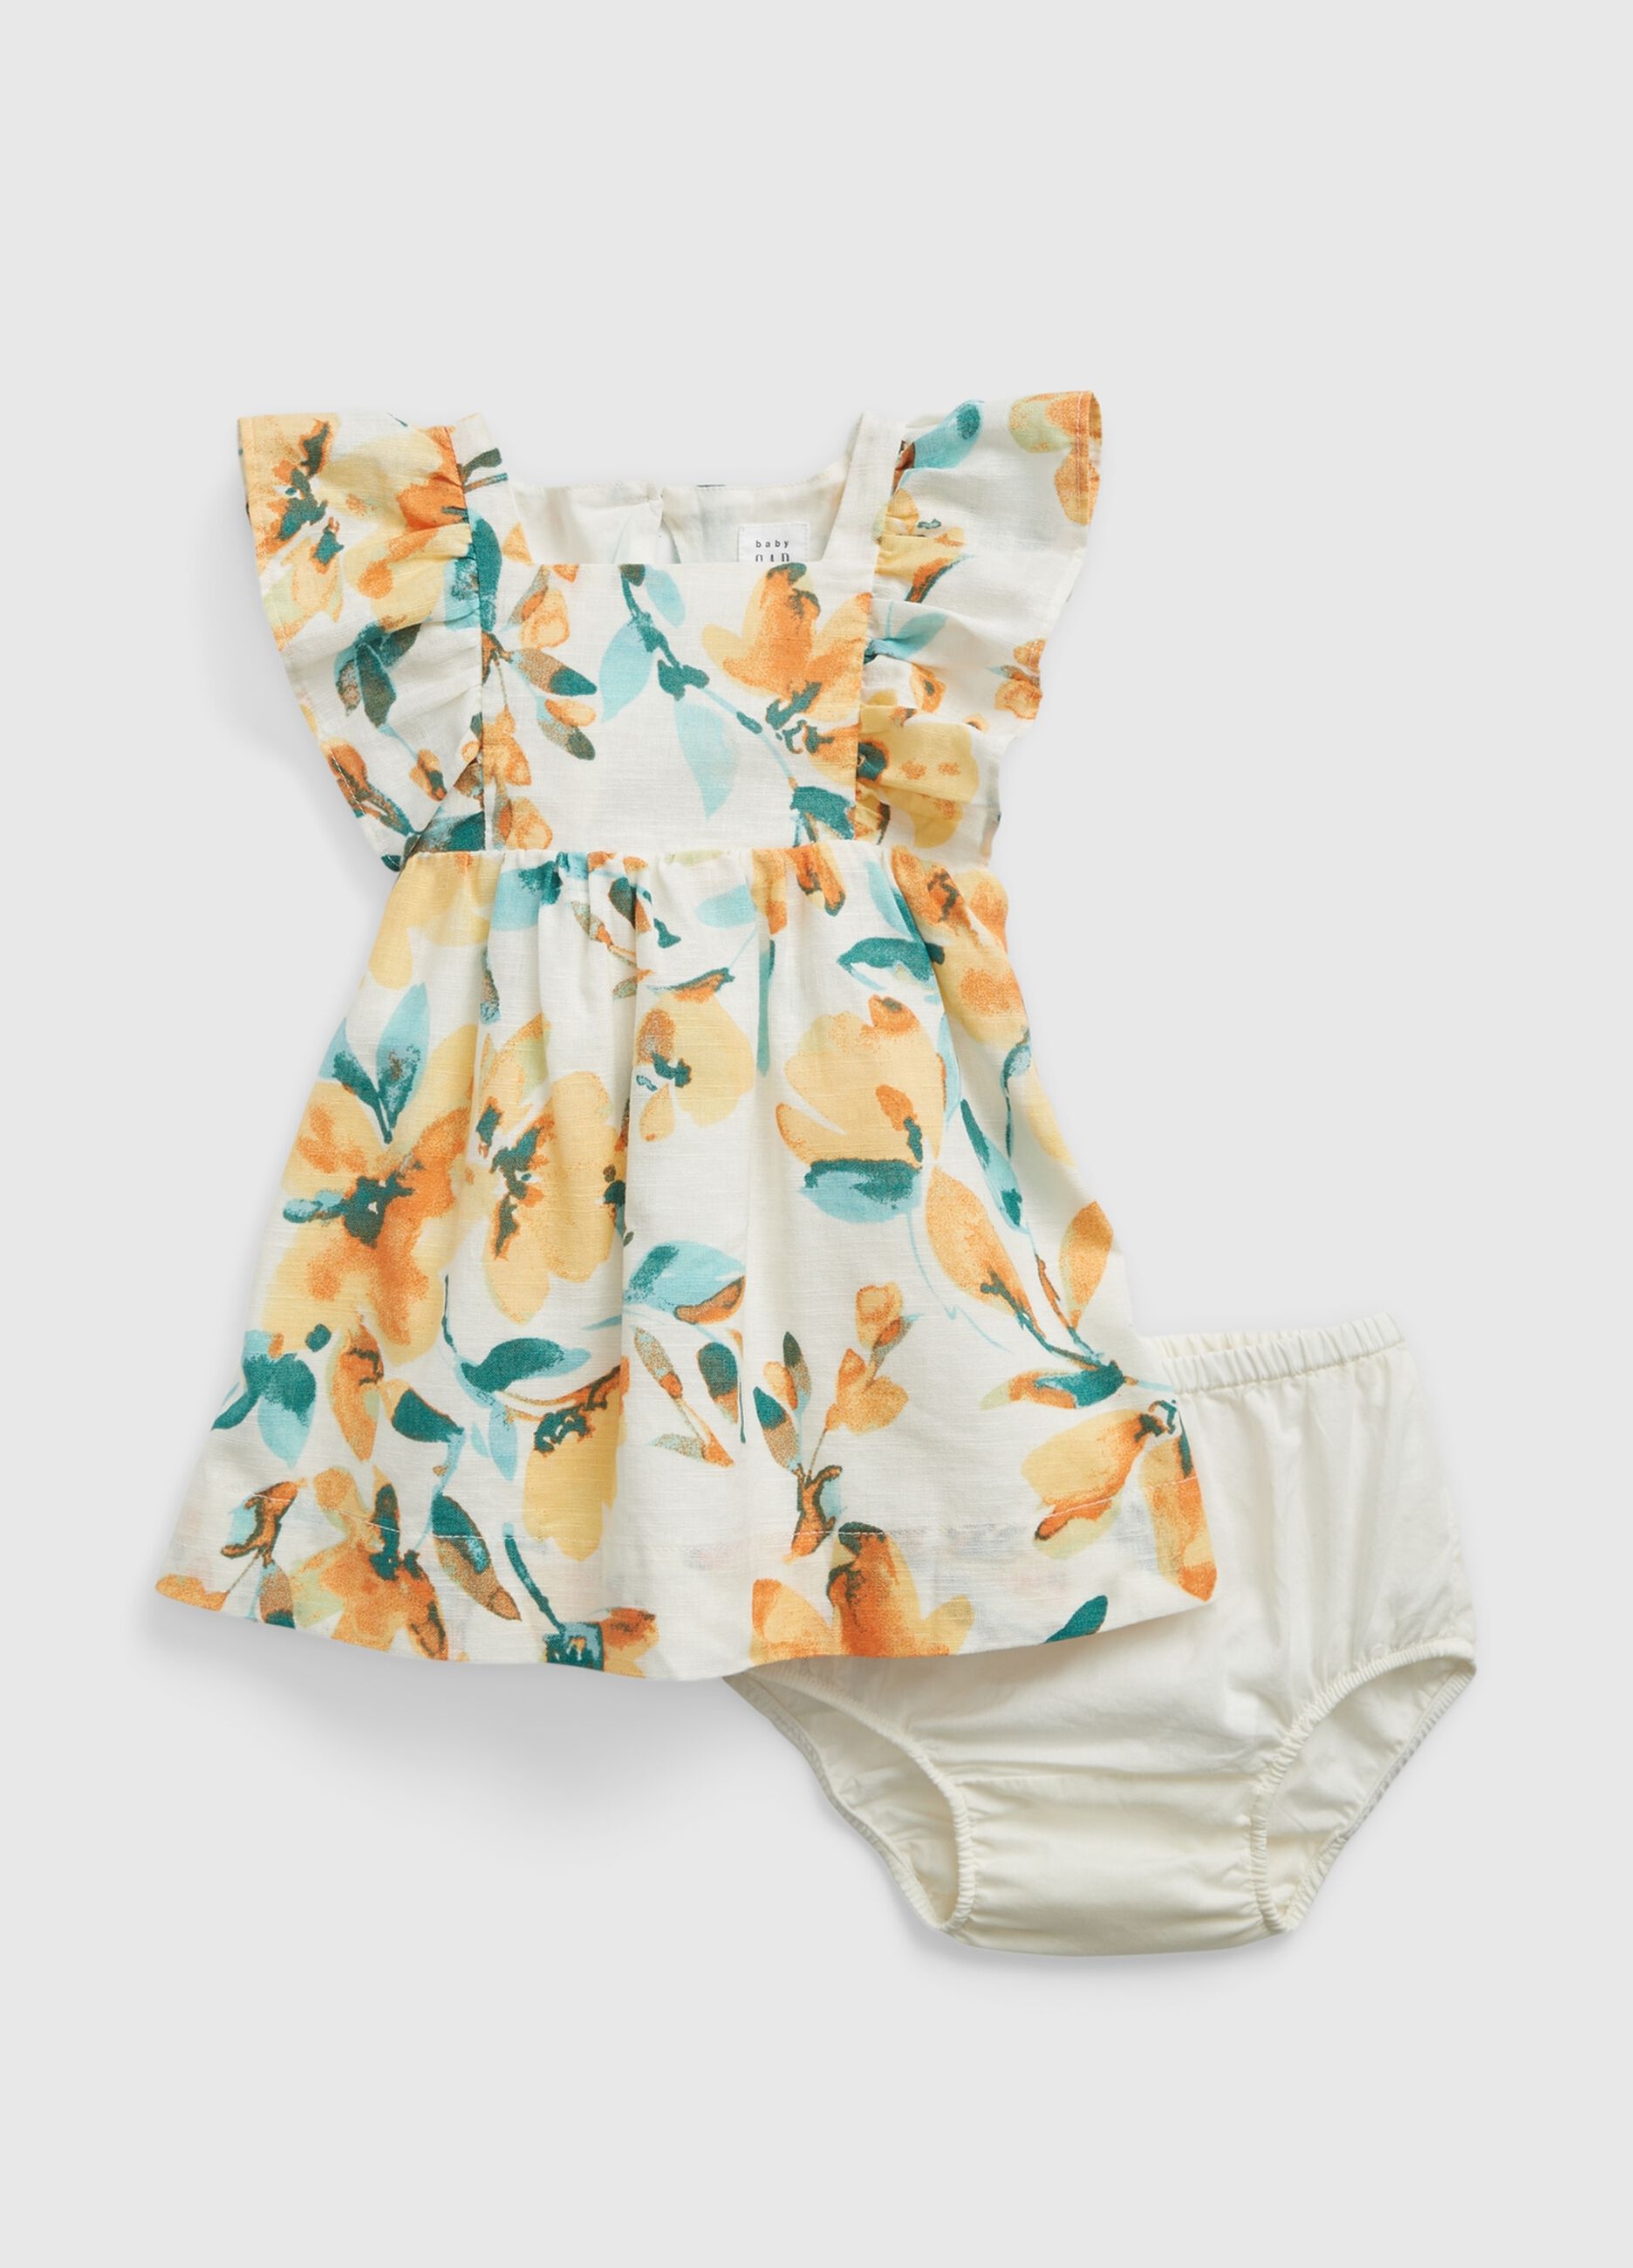 Floral dress and knicker shorts set